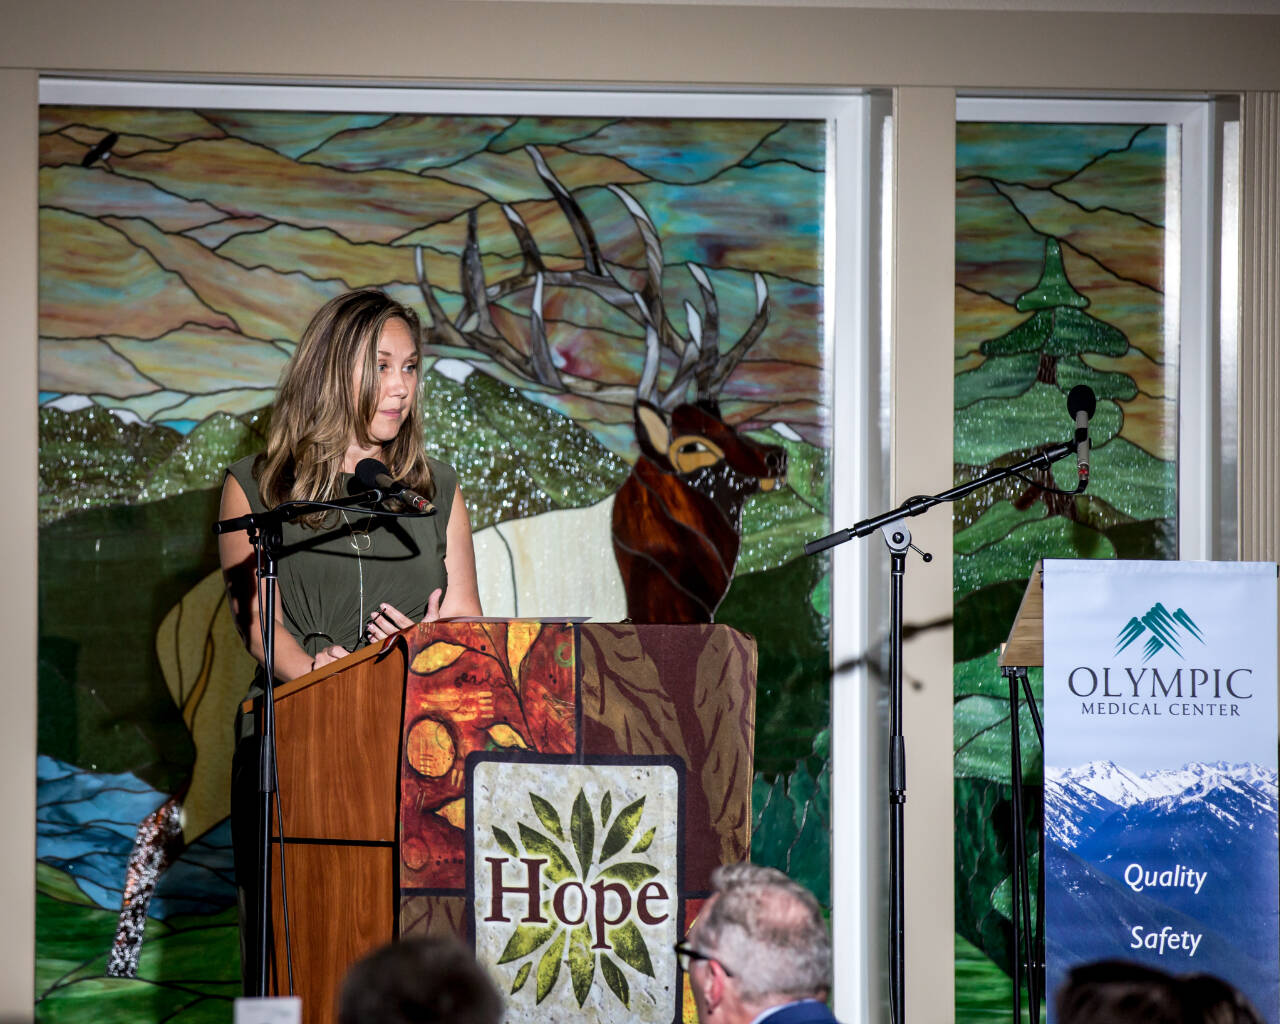 Carrie Wallin of the Fred Hutchinson Cancer Center talks about the institution’s long relationship with the OMC Cancer Center at the Harvest of Hope dinner in Sequim. (Photo courtesy of Olympic Medical Center Foundation)